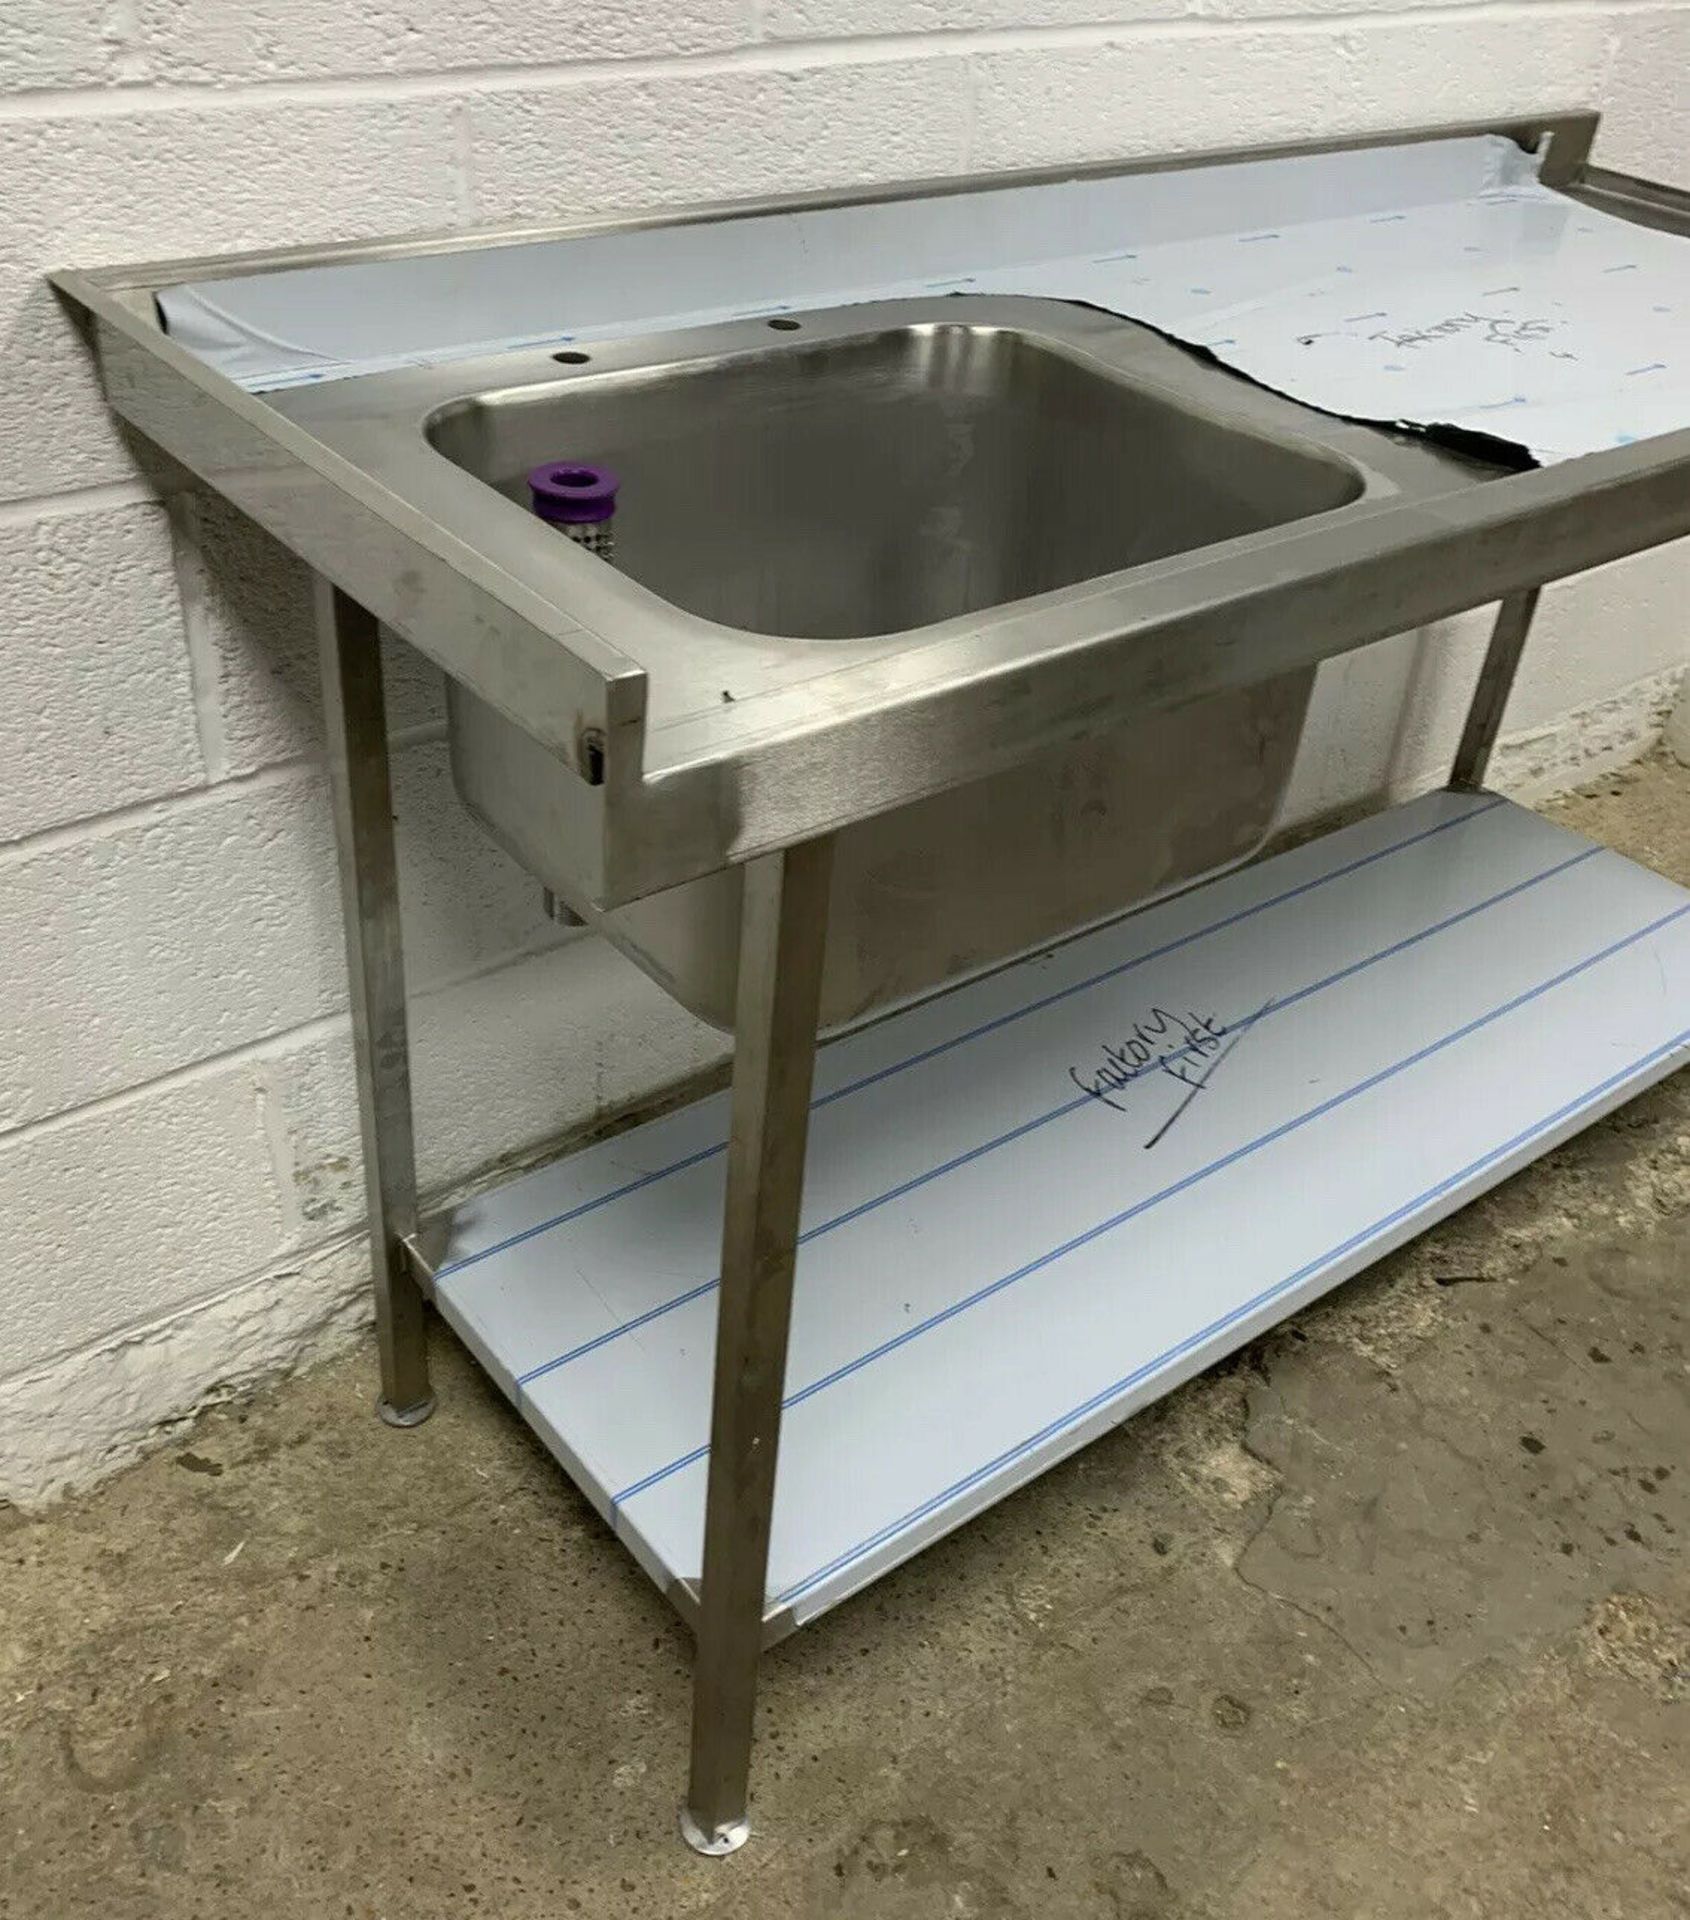 Stainless Steel Single Bowl Sink With Righthand Drainer And Upstand - Image 2 of 4